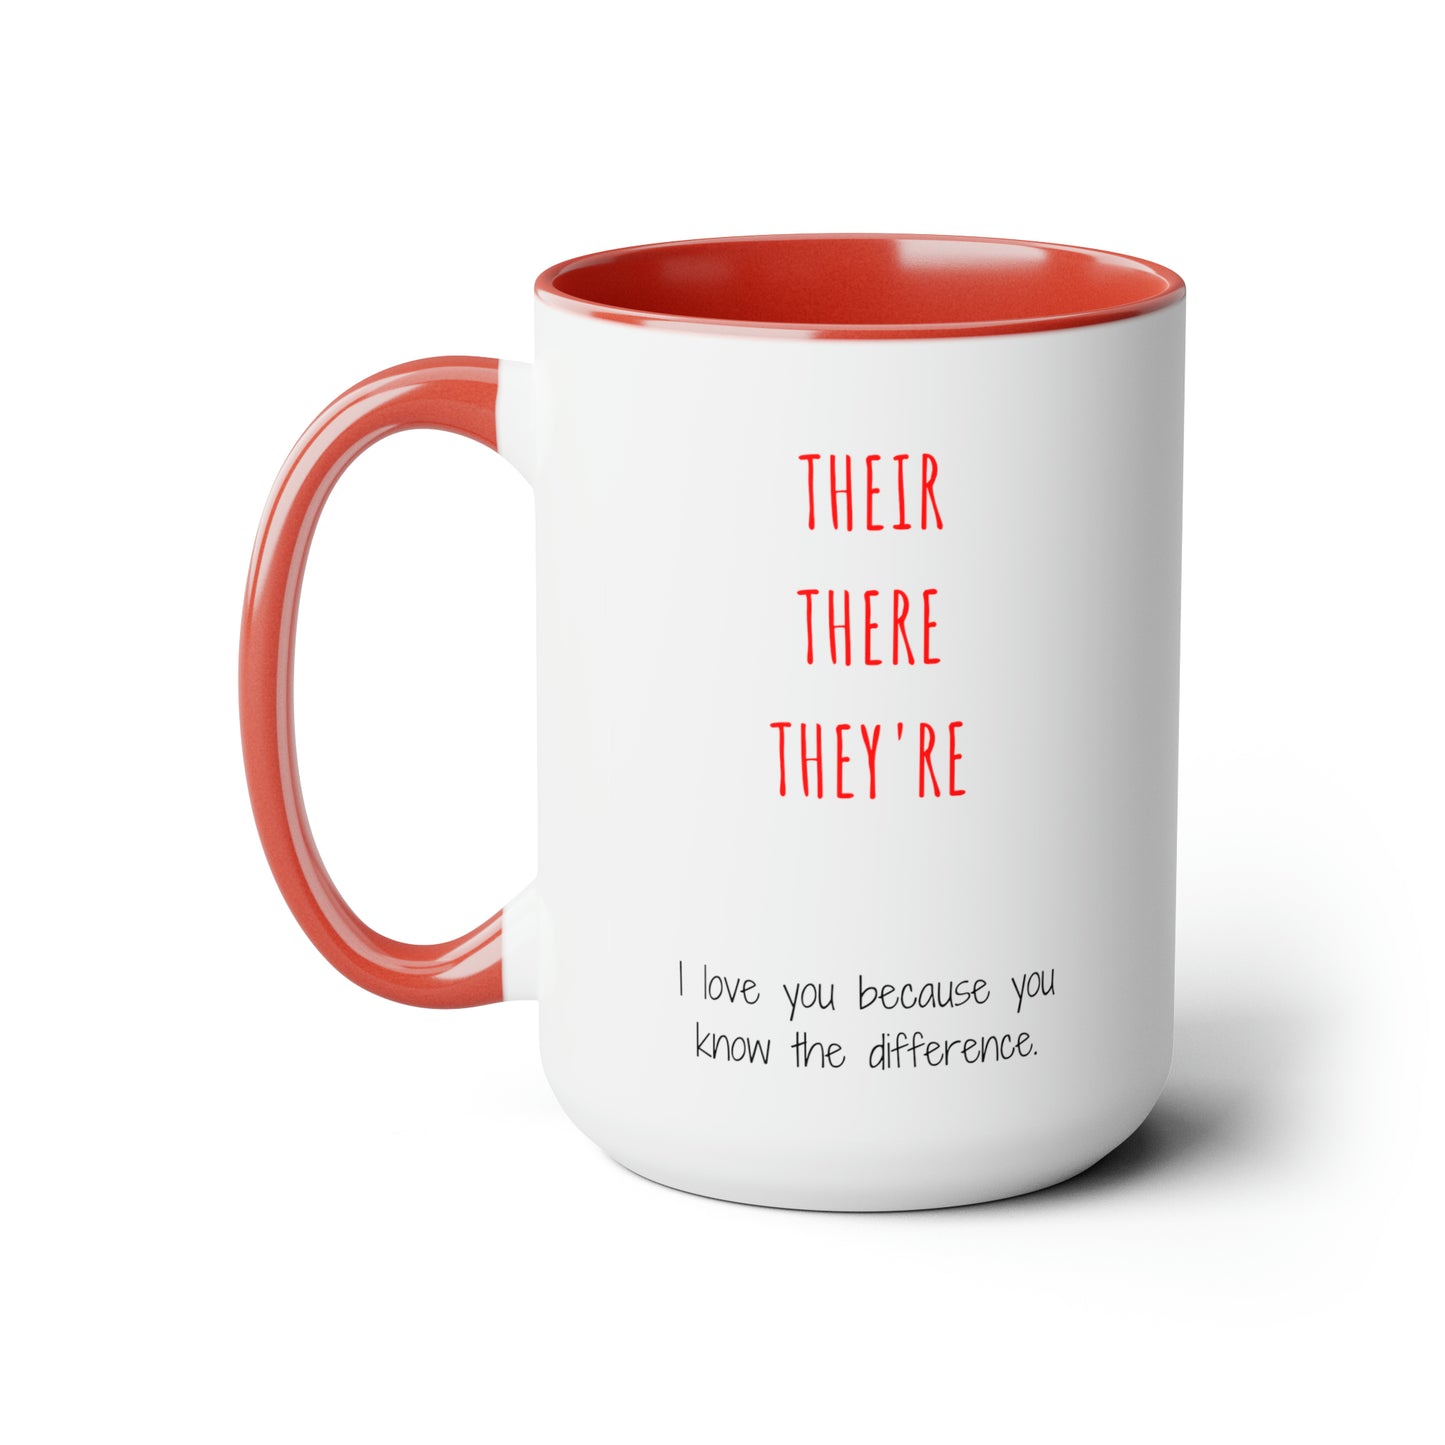 Their There They're Love You Mug 15 oz